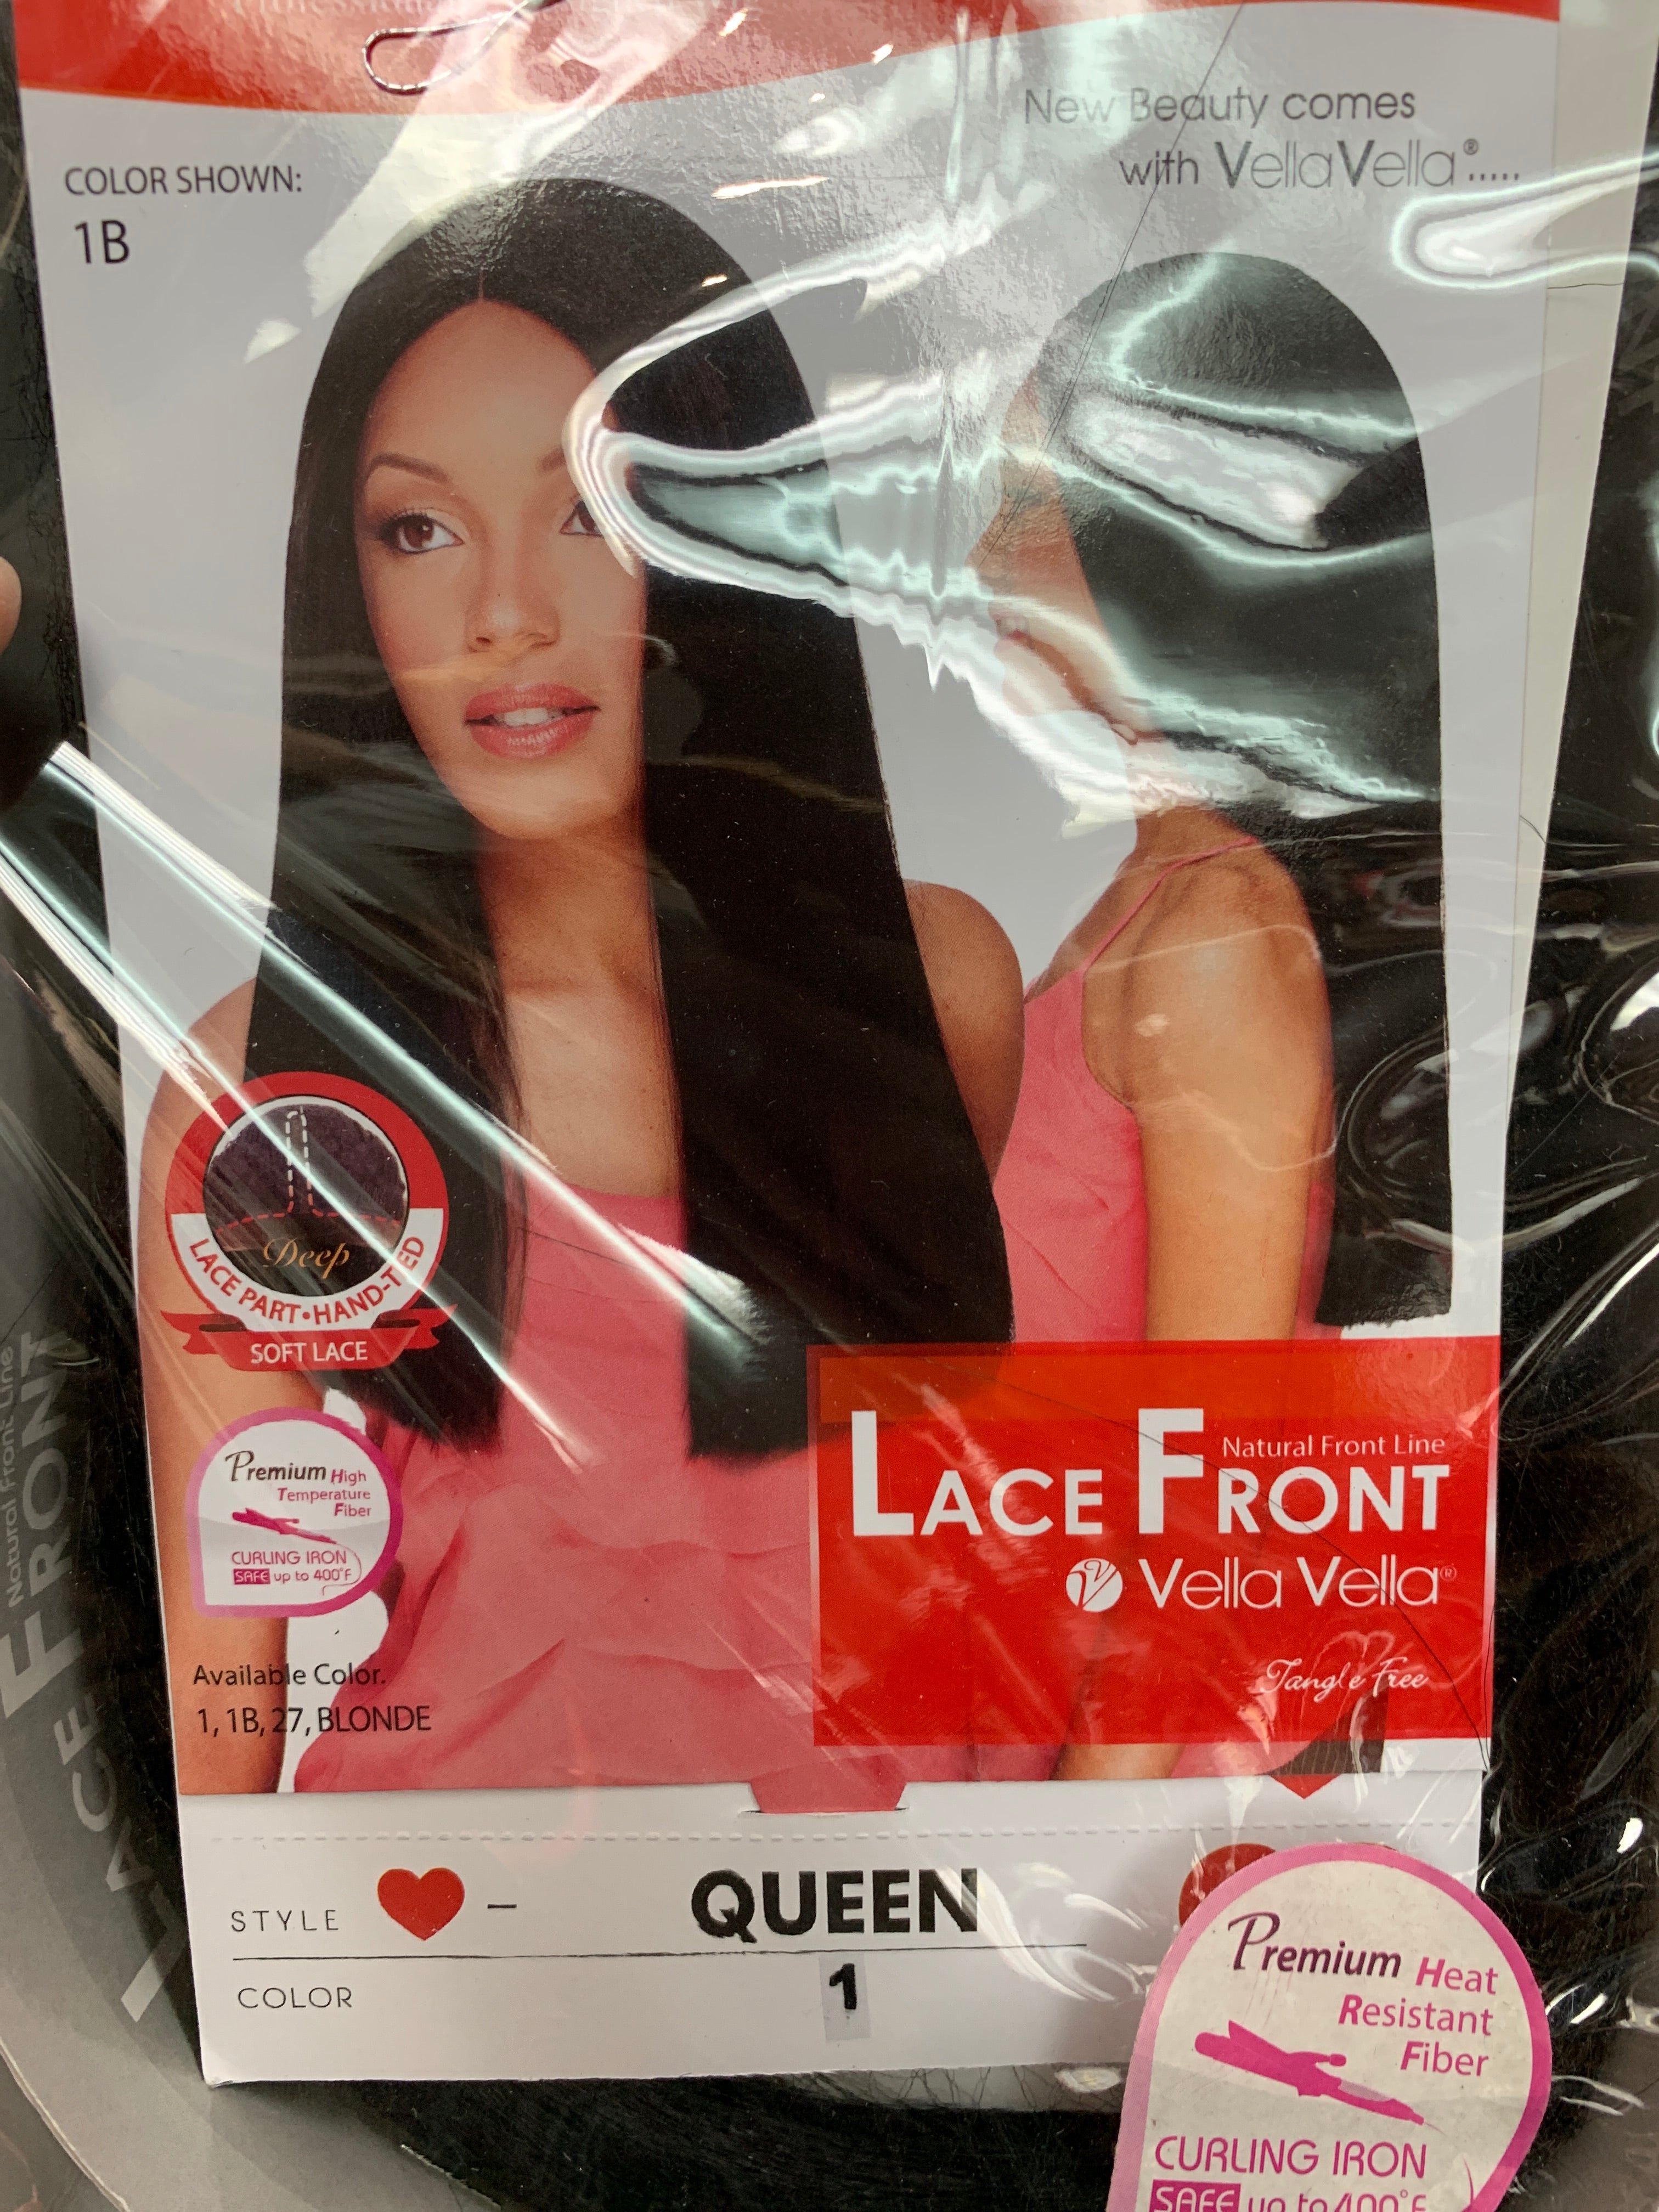 Sensual lace front Queen